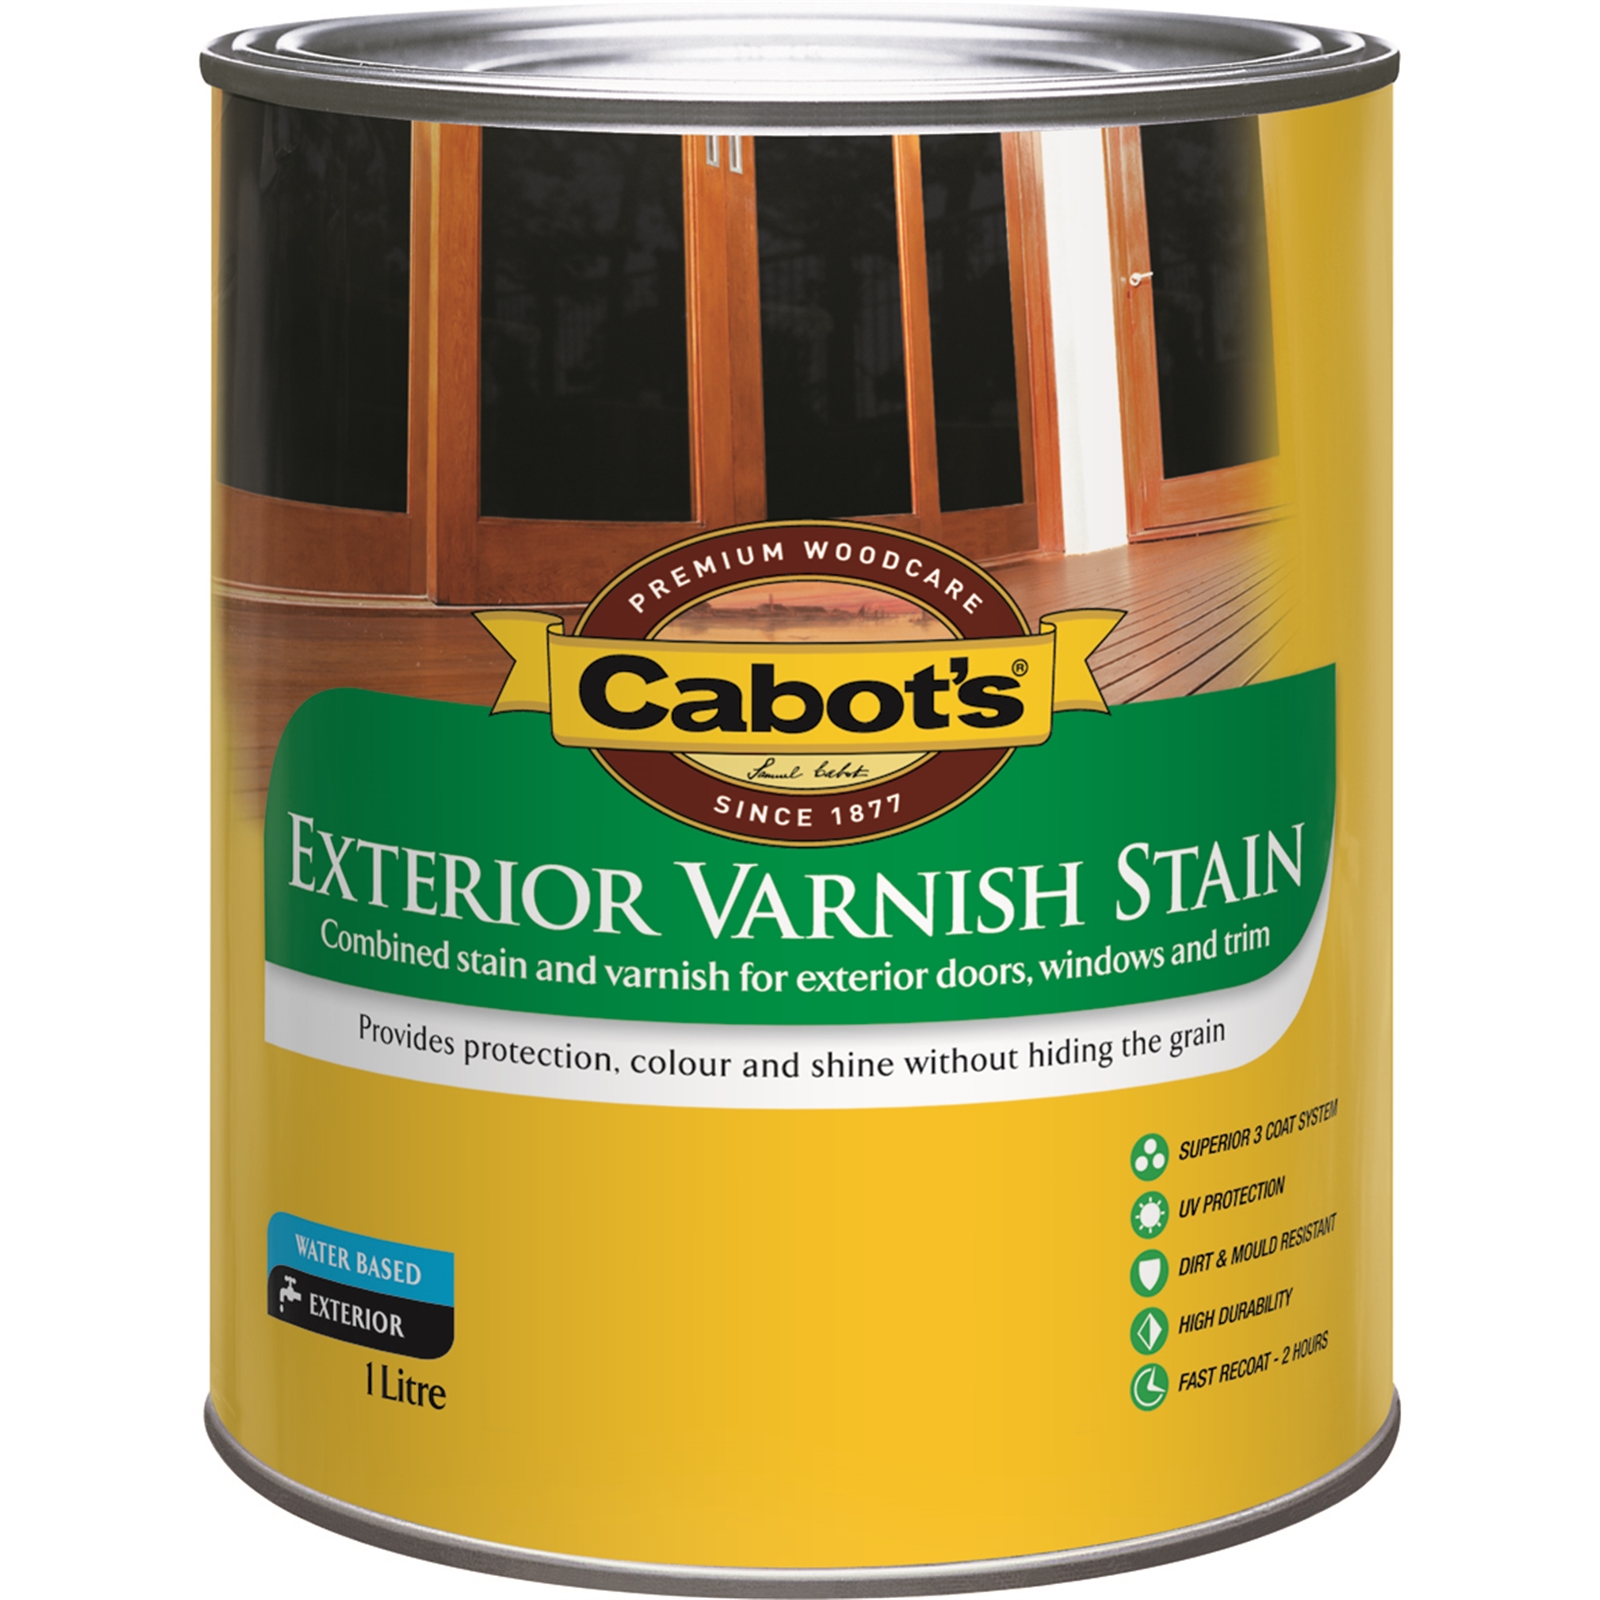 Cabot's 1L Tint Base Exterior Varnish Stain